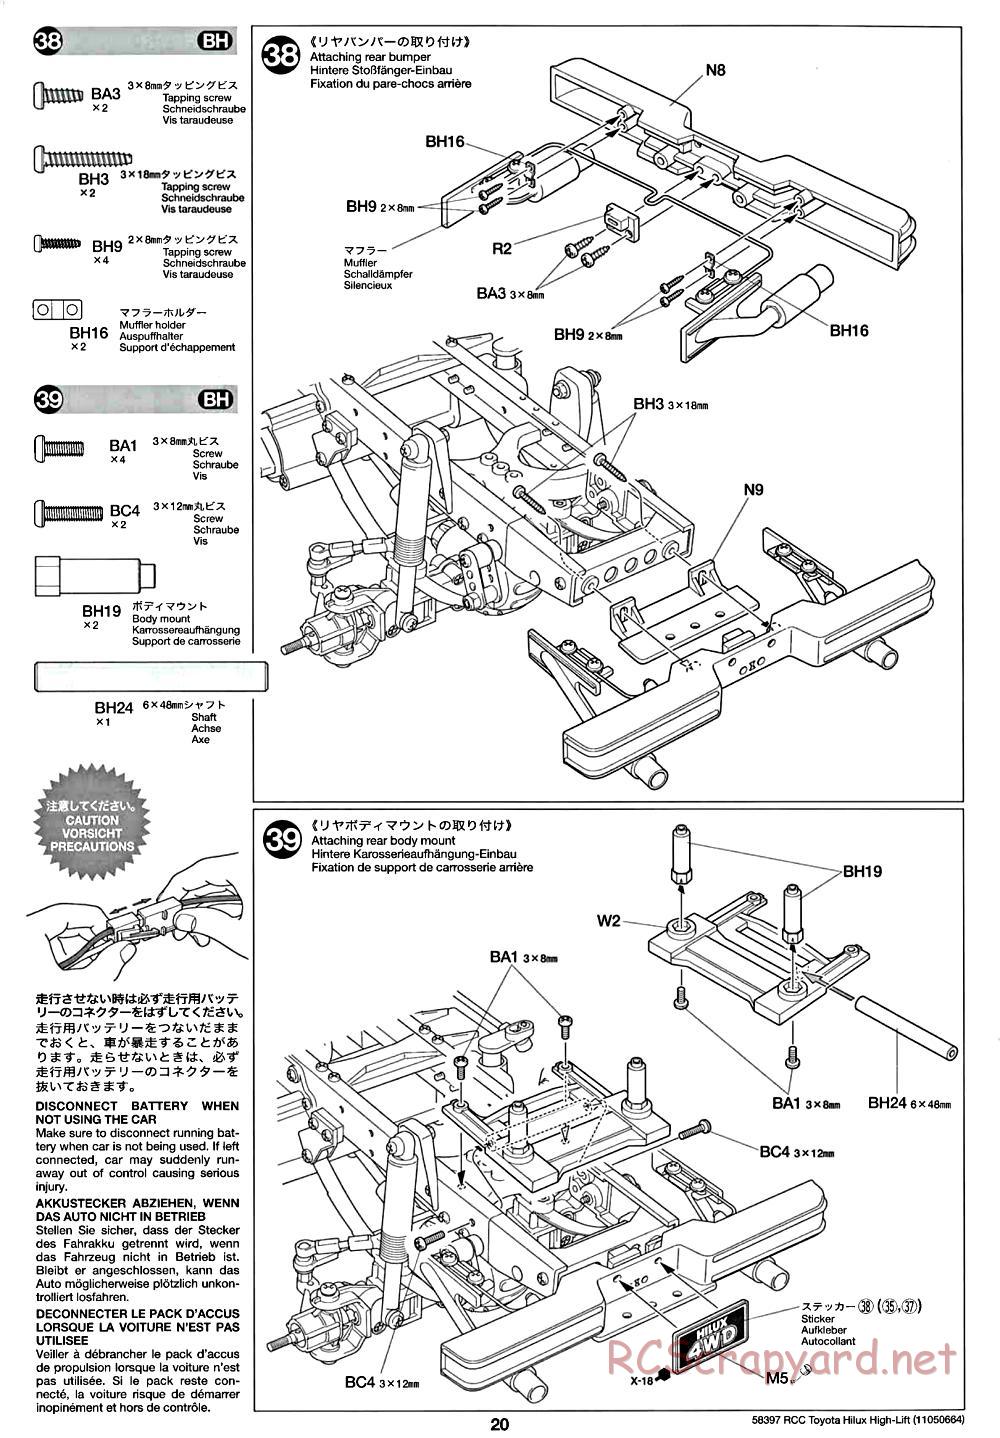 Tamiya - Toyota Hilux High-Lift Chassis - Manual - Page 20